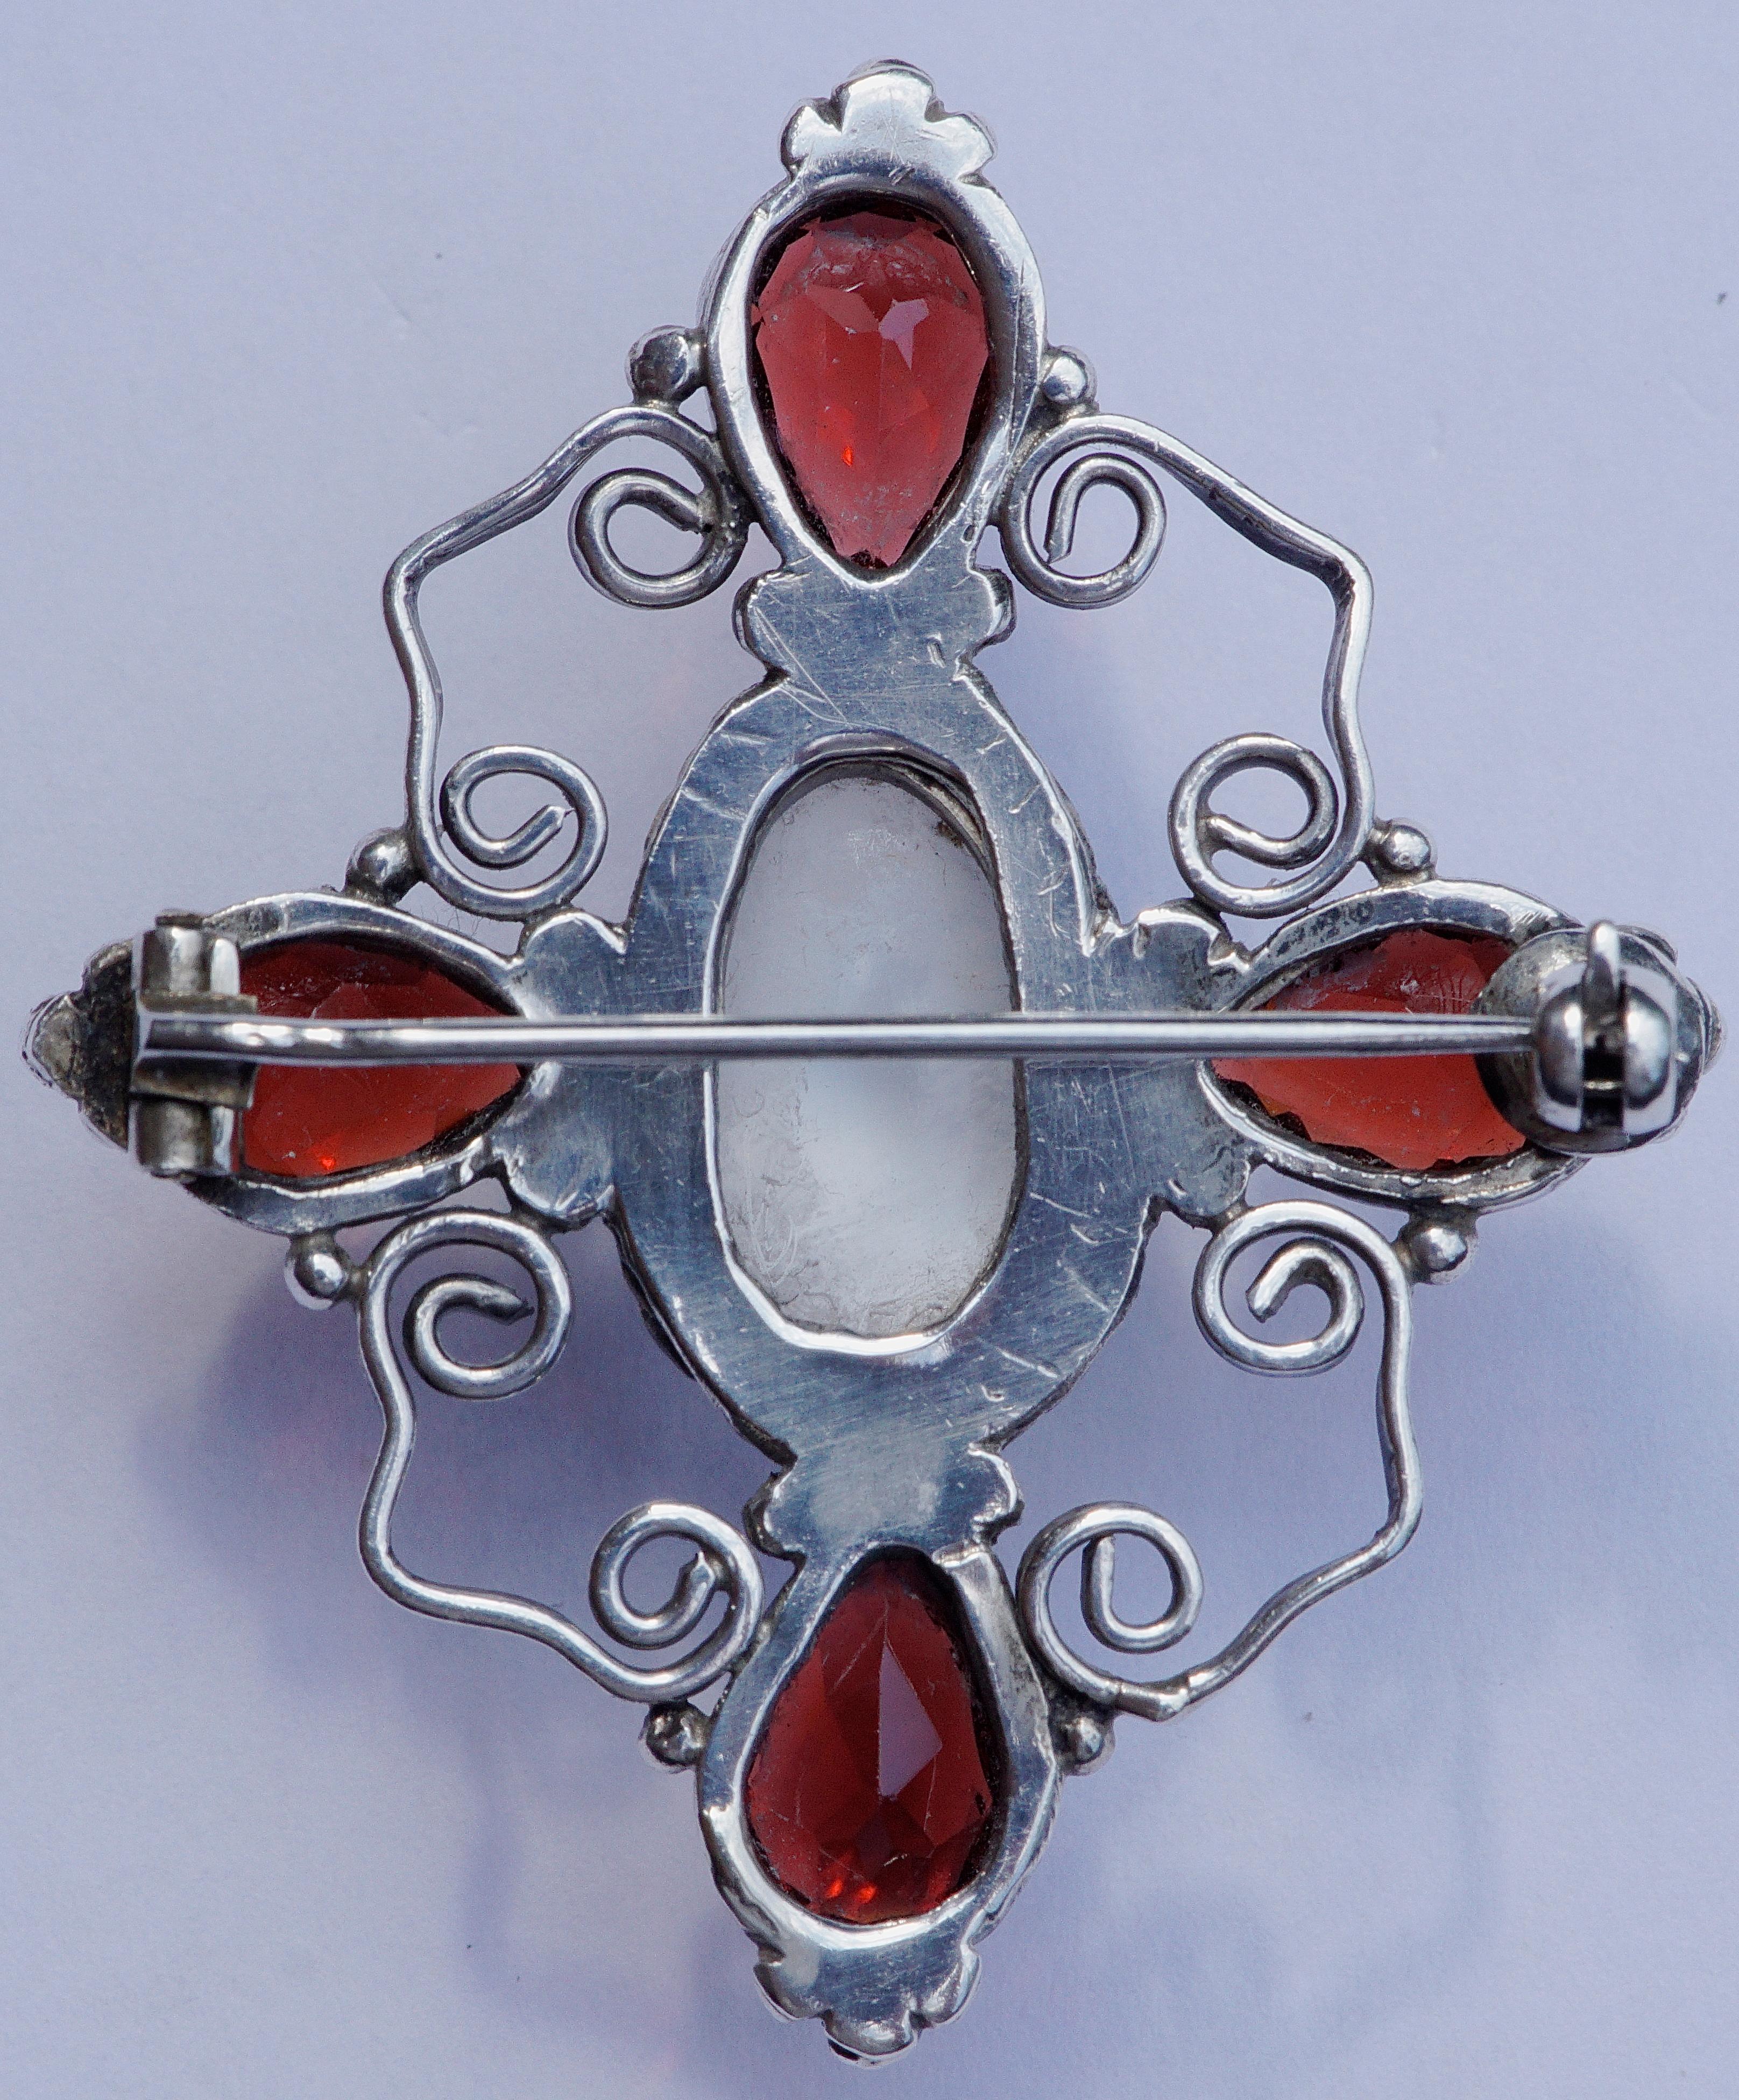 Beautiful rope twist and swirl design silver brooch featuring four faceted faux garnets, and a faux moonstone. The brooch measures 4.5cm / 1.77 inches by 3.8cm / 1.49 inches. There are no hallmarks, but the brooch tests as silver. The pin is bent at